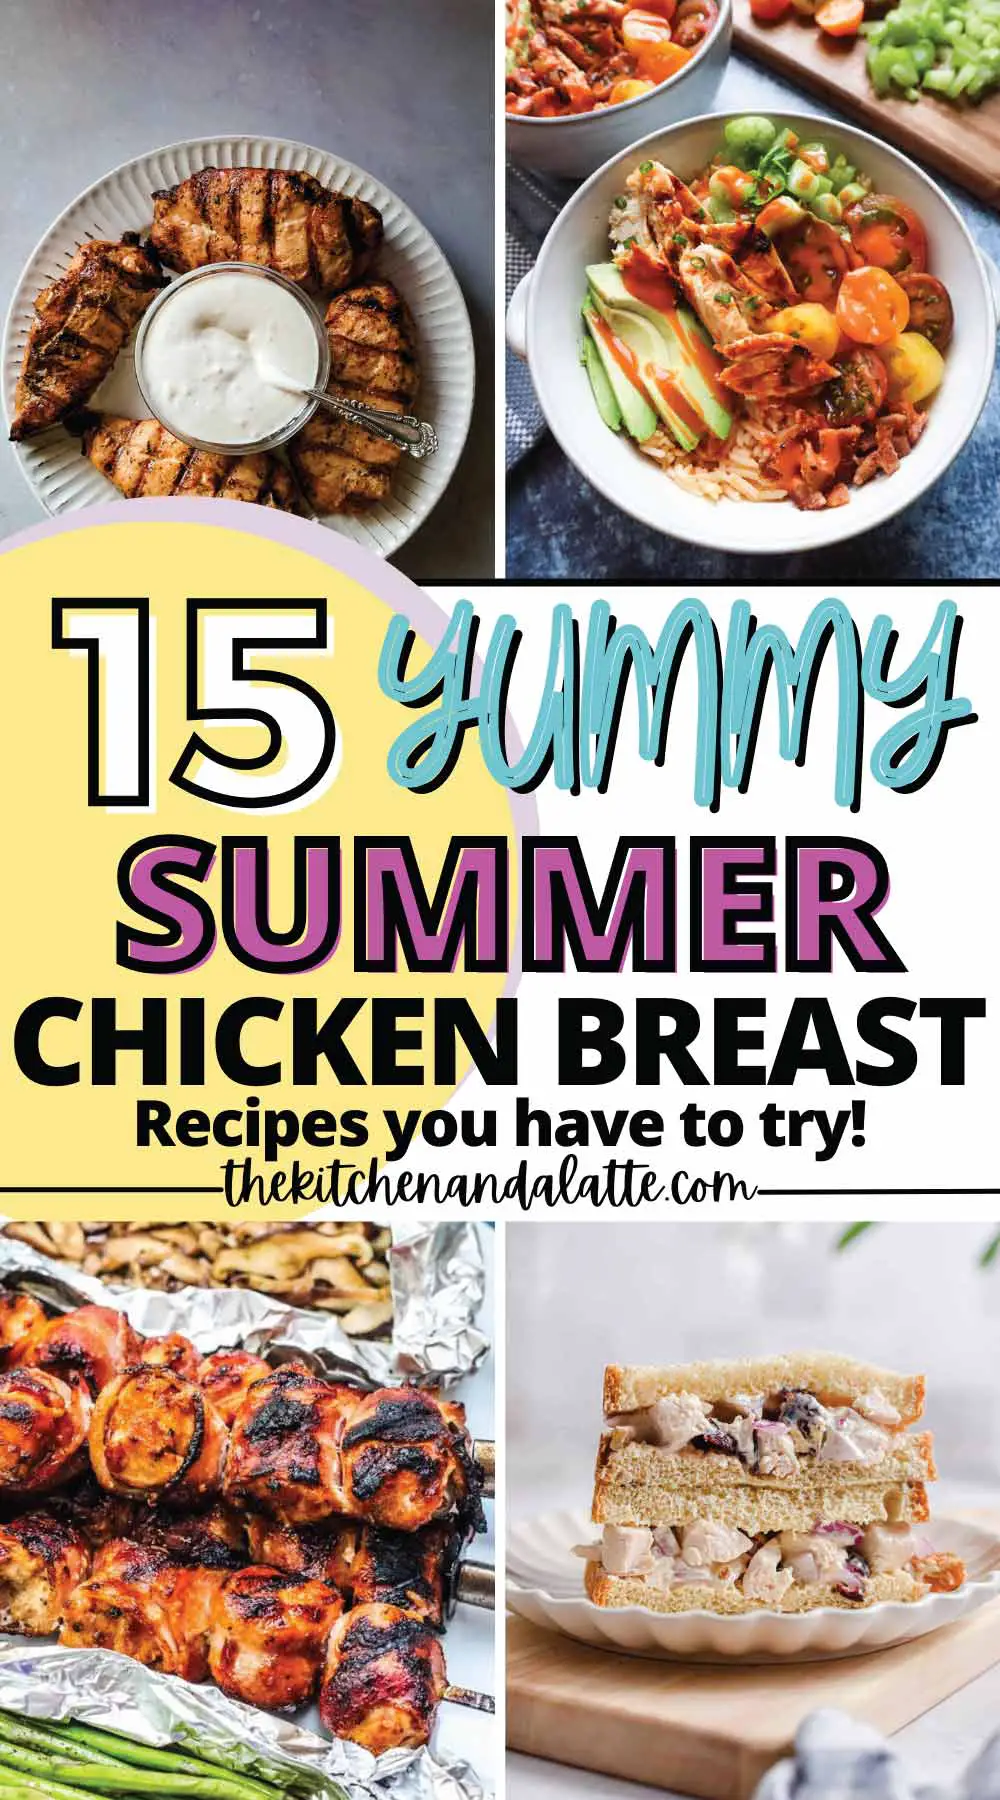 15 yummy summer chicken breast recipes you have to try! Shown - grilled chicken breasts on a plate with a garlic sauce in the middle of the plate for dipping, buffalo chicken rice bowl, chicken skewers wrapped in bacon with a side of asparagus and walnut cranberry chicken salad on bread cut in half ready to serve.